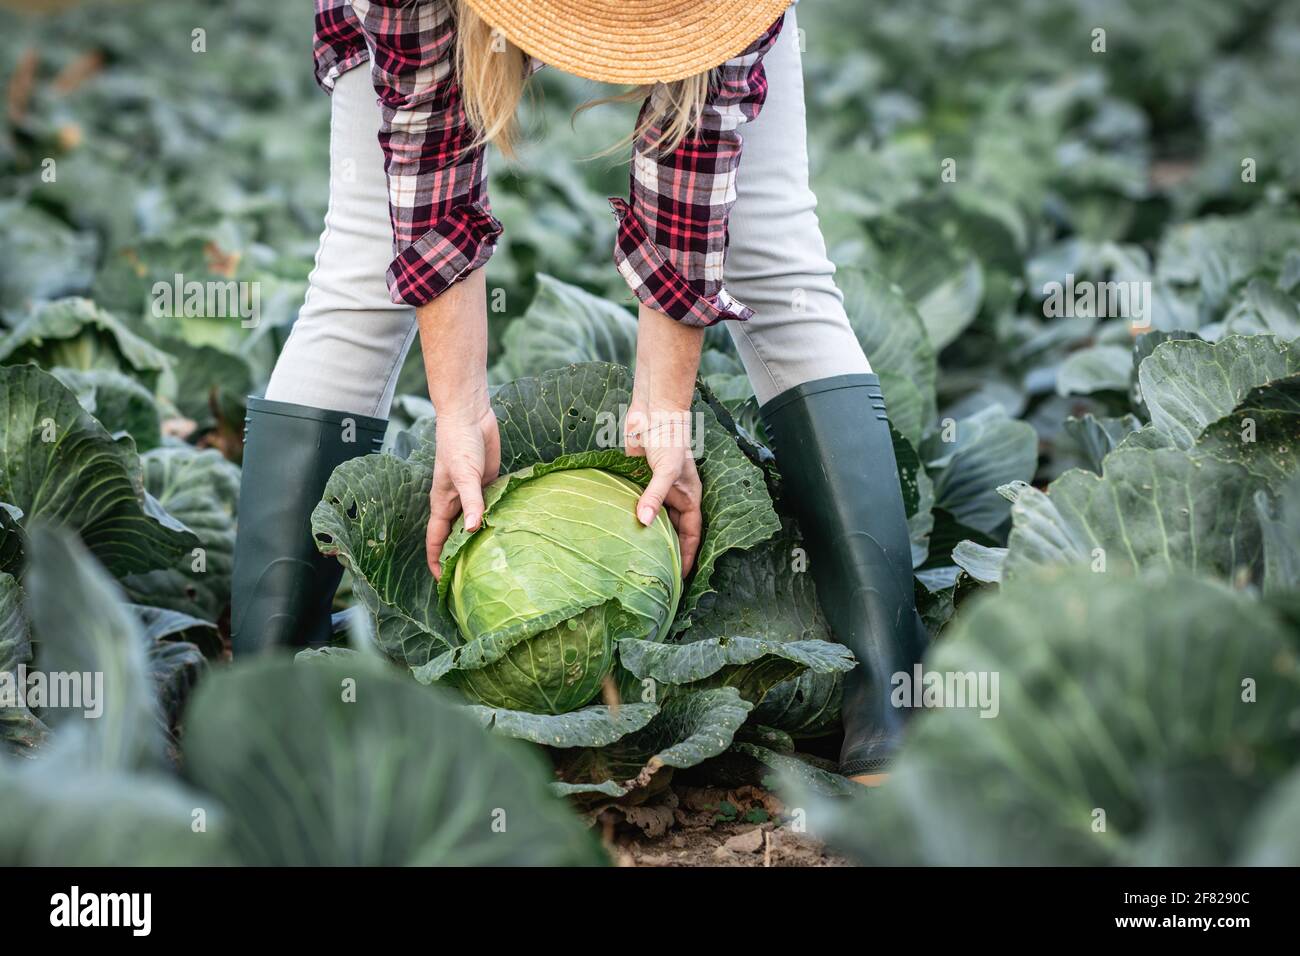 Farmer picking cabbage at agricultural field. Woman wearing plaid shirt, straw hat and rubber boots and working at vegetable garden. Organic farming a Stock Photo